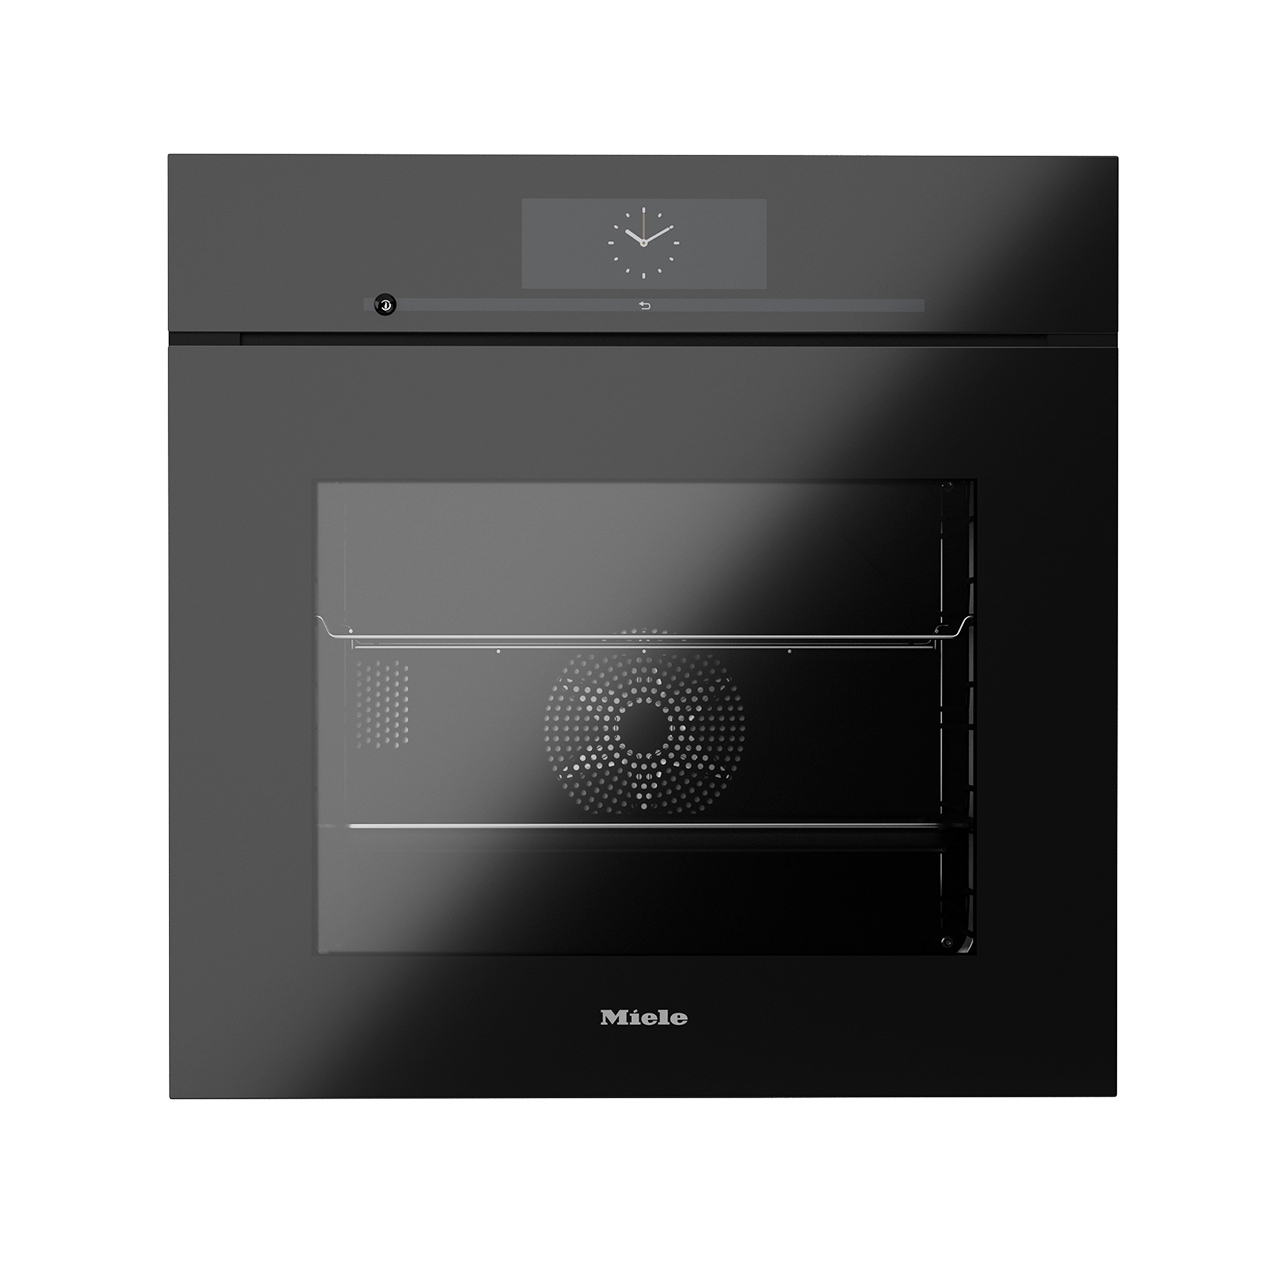 DGC 6860 Steam Combination Oven by Miele